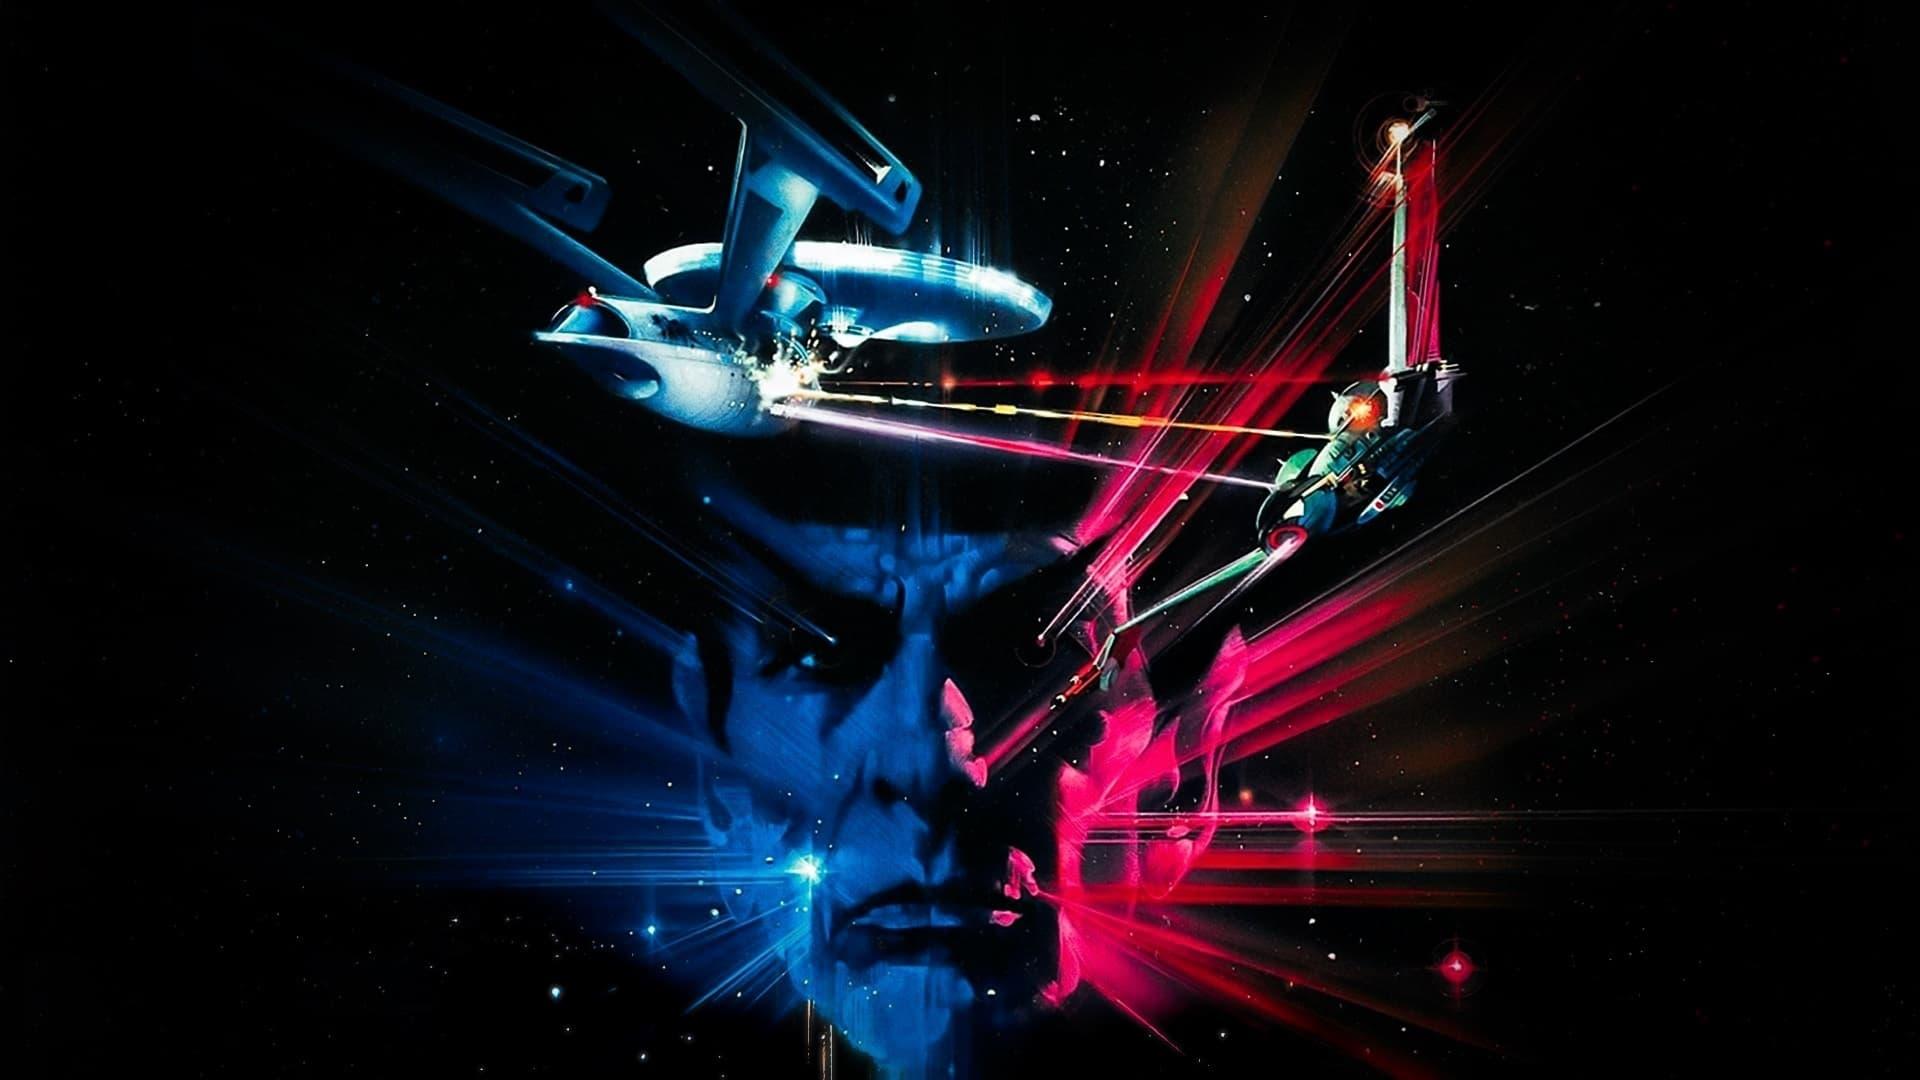 Star Trek III: The Search for Spock backdrop